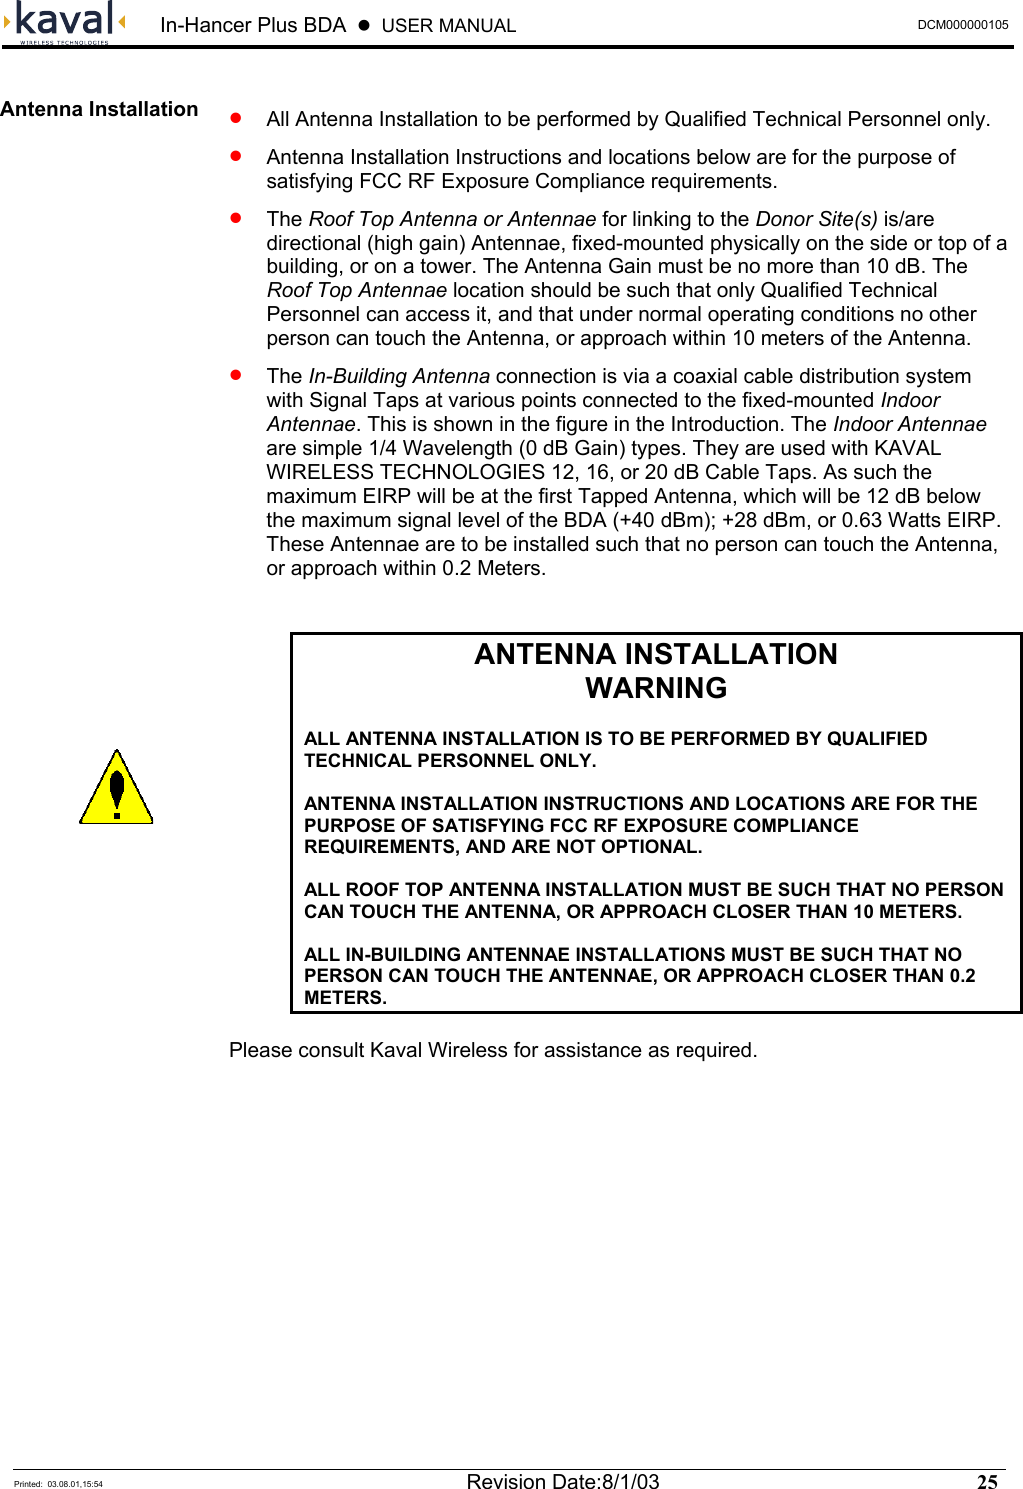  In-Hancer Plus BDA    USER MANUAL  DCM000000105  Printed:  03.08.01,15:54  Revision Date:8/1/03   25    •   All Antenna Installation to be performed by Qualified Technical Personnel only. •   Antenna Installation Instructions and locations below are for the purpose of satisfying FCC RF Exposure Compliance requirements. •  The Roof Top Antenna or Antennae for linking to the Donor Site(s) is/are directional (high gain) Antennae, fixed-mounted physically on the side or top of a building, or on a tower. The Antenna Gain must be no more than 10 dB. The Roof Top Antennae location should be such that only Qualified Technical Personnel can access it, and that under normal operating conditions no other person can touch the Antenna, or approach within 10 meters of the Antenna. •  The In-Building Antenna connection is via a coaxial cable distribution system with Signal Taps at various points connected to the fixed-mounted Indoor Antennae. This is shown in the figure in the Introduction. The Indoor Antennae are simple 1/4 Wavelength (0 dB Gain) types. They are used with KAVAL WIRELESS TECHNOLOGIES 12, 16, or 20 dB Cable Taps. As such the maximum EIRP will be at the first Tapped Antenna, which will be 12 dB below the maximum signal level of the BDA (+40 dBm); +28 dBm, or 0.63 Watts EIRP. These Antennae are to be installed such that no person can touch the Antenna, or approach within 0.2 Meters.   ANTENNA INSTALLATION WARNING  ALL ANTENNA INSTALLATION IS TO BE PERFORMED BY QUALIFIED TECHNICAL PERSONNEL ONLY.  ANTENNA INSTALLATION INSTRUCTIONS AND LOCATIONS ARE FOR THE PURPOSE OF SATISFYING FCC RF EXPOSURE COMPLIANCE REQUIREMENTS, AND ARE NOT OPTIONAL.  ALL ROOF TOP ANTENNA INSTALLATION MUST BE SUCH THAT NO PERSON CAN TOUCH THE ANTENNA, OR APPROACH CLOSER THAN 10 METERS.   ALL IN-BUILDING ANTENNAE INSTALLATIONS MUST BE SUCH THAT NO PERSON CAN TOUCH THE ANTENNAE, OR APPROACH CLOSER THAN 0.2 METERS.  Please consult Kaval Wireless for assistance as required.  Antenna Installation  